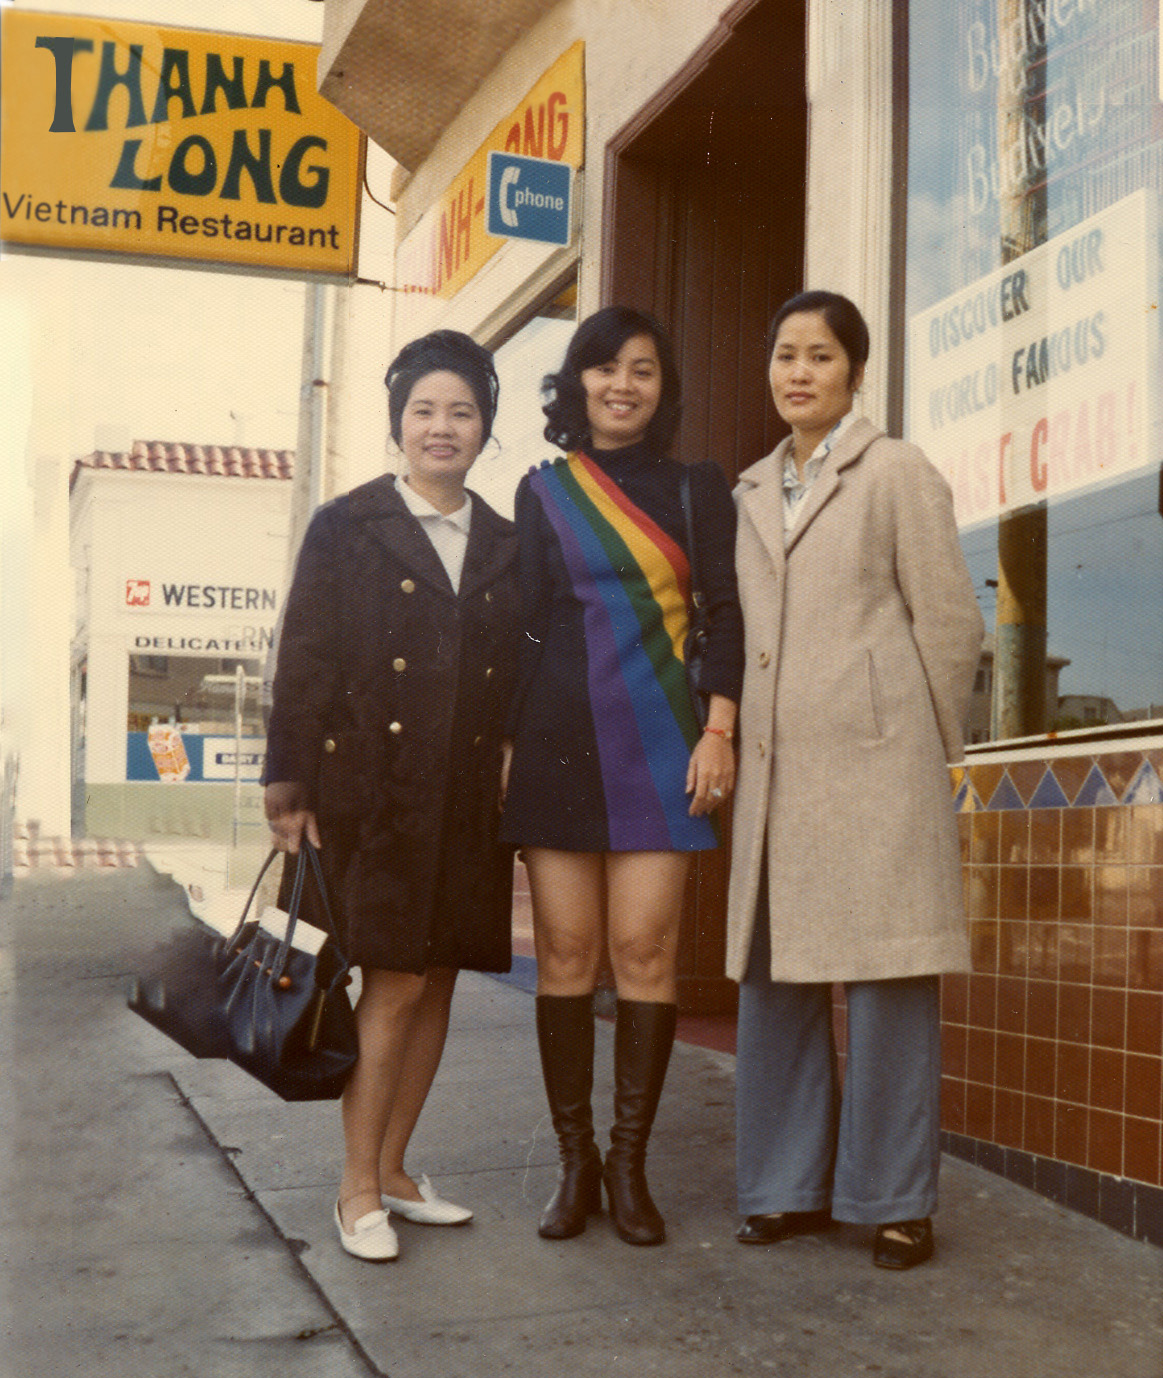 Diana An (left) poses with her cousins outside her restaurant Thanh Long, circa 1975. 